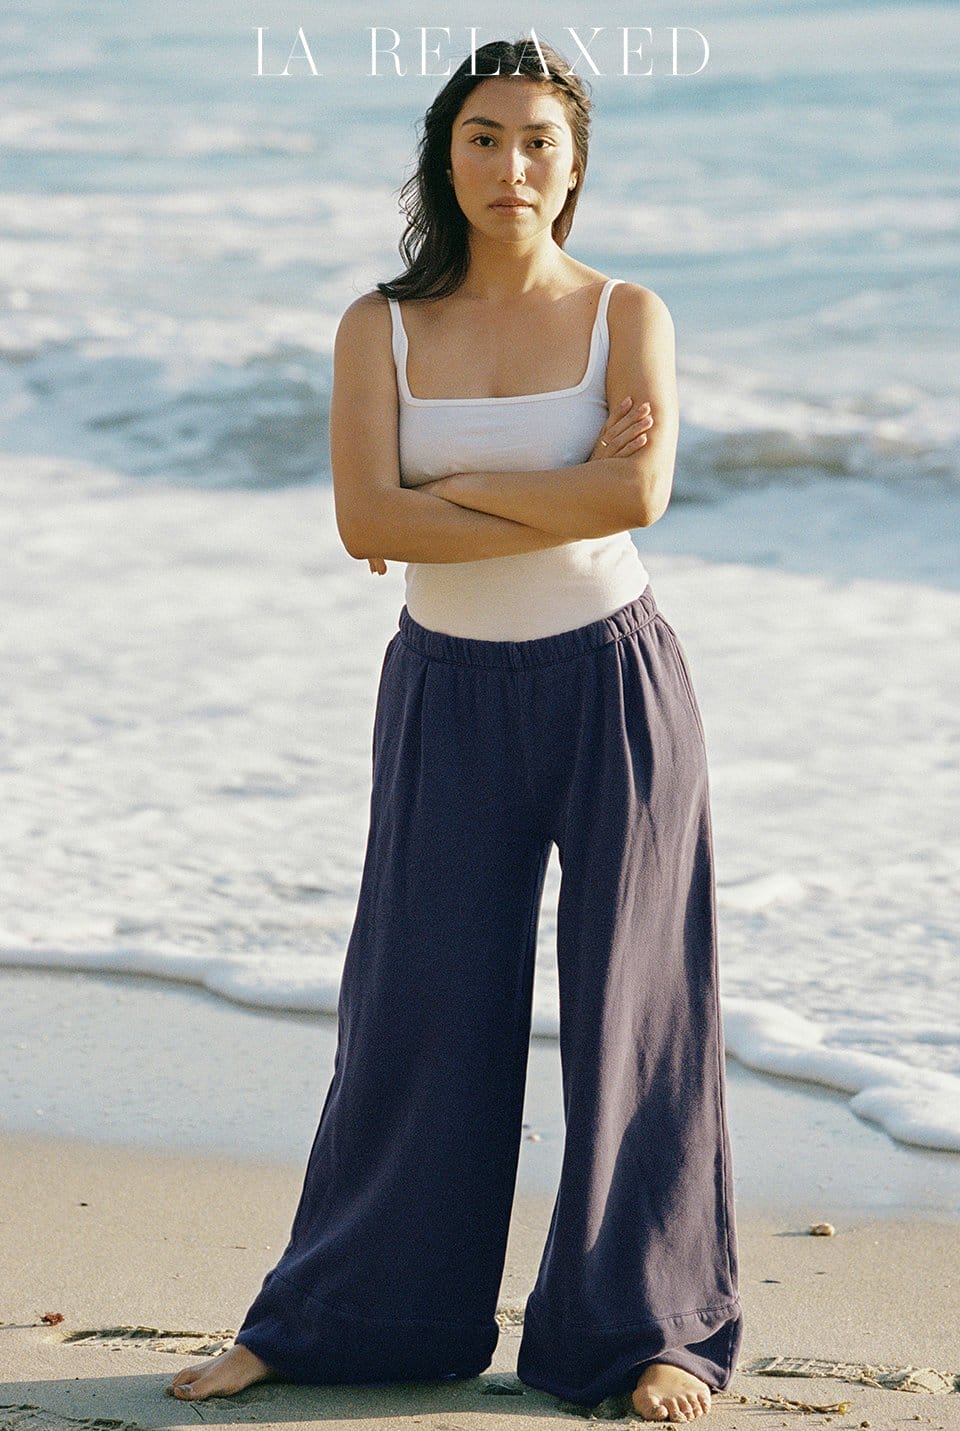 Model stands on beach wearing white camisole and navy fleece wide leg pants.